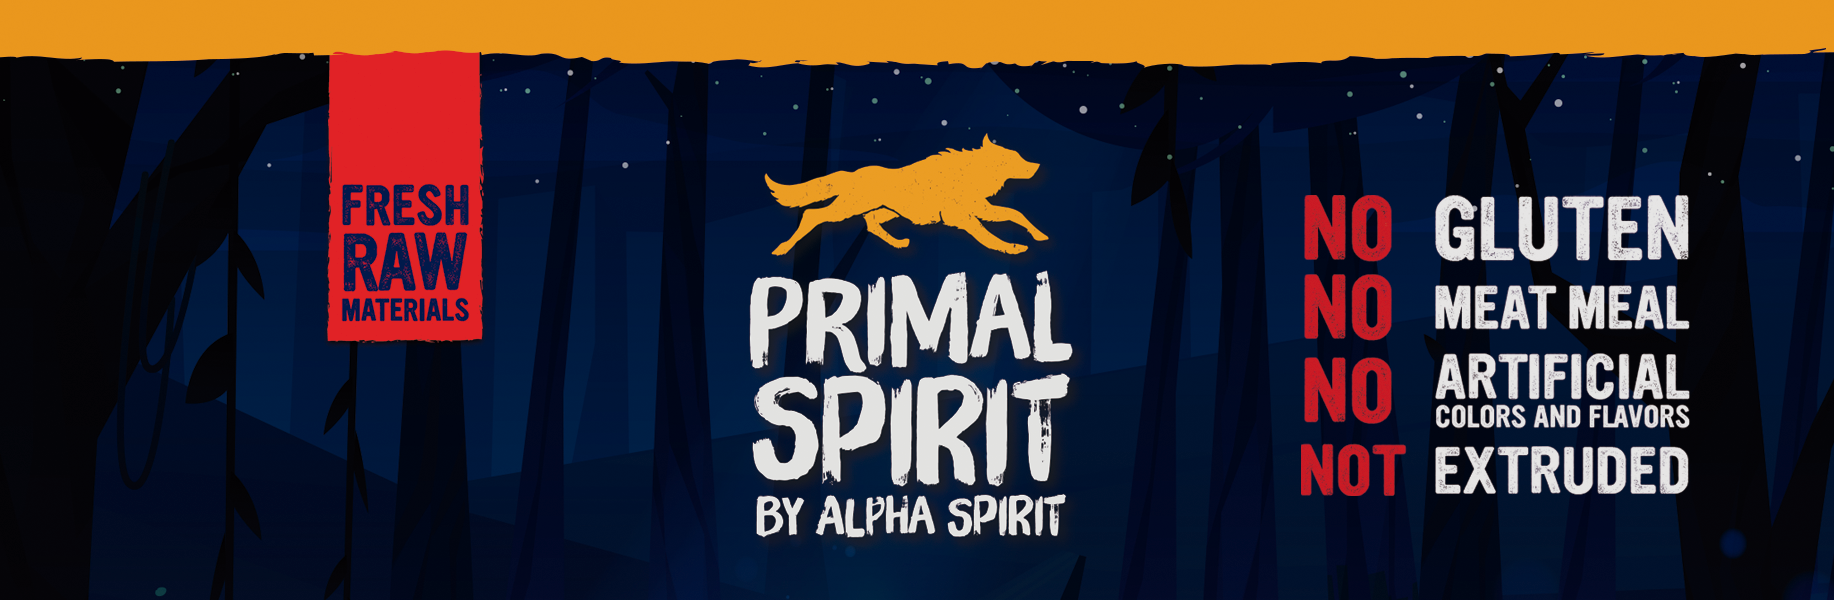 BANNER_PRIMAL_3b2fa138-994d-4020-b0a7-627a9ba6c8be.png